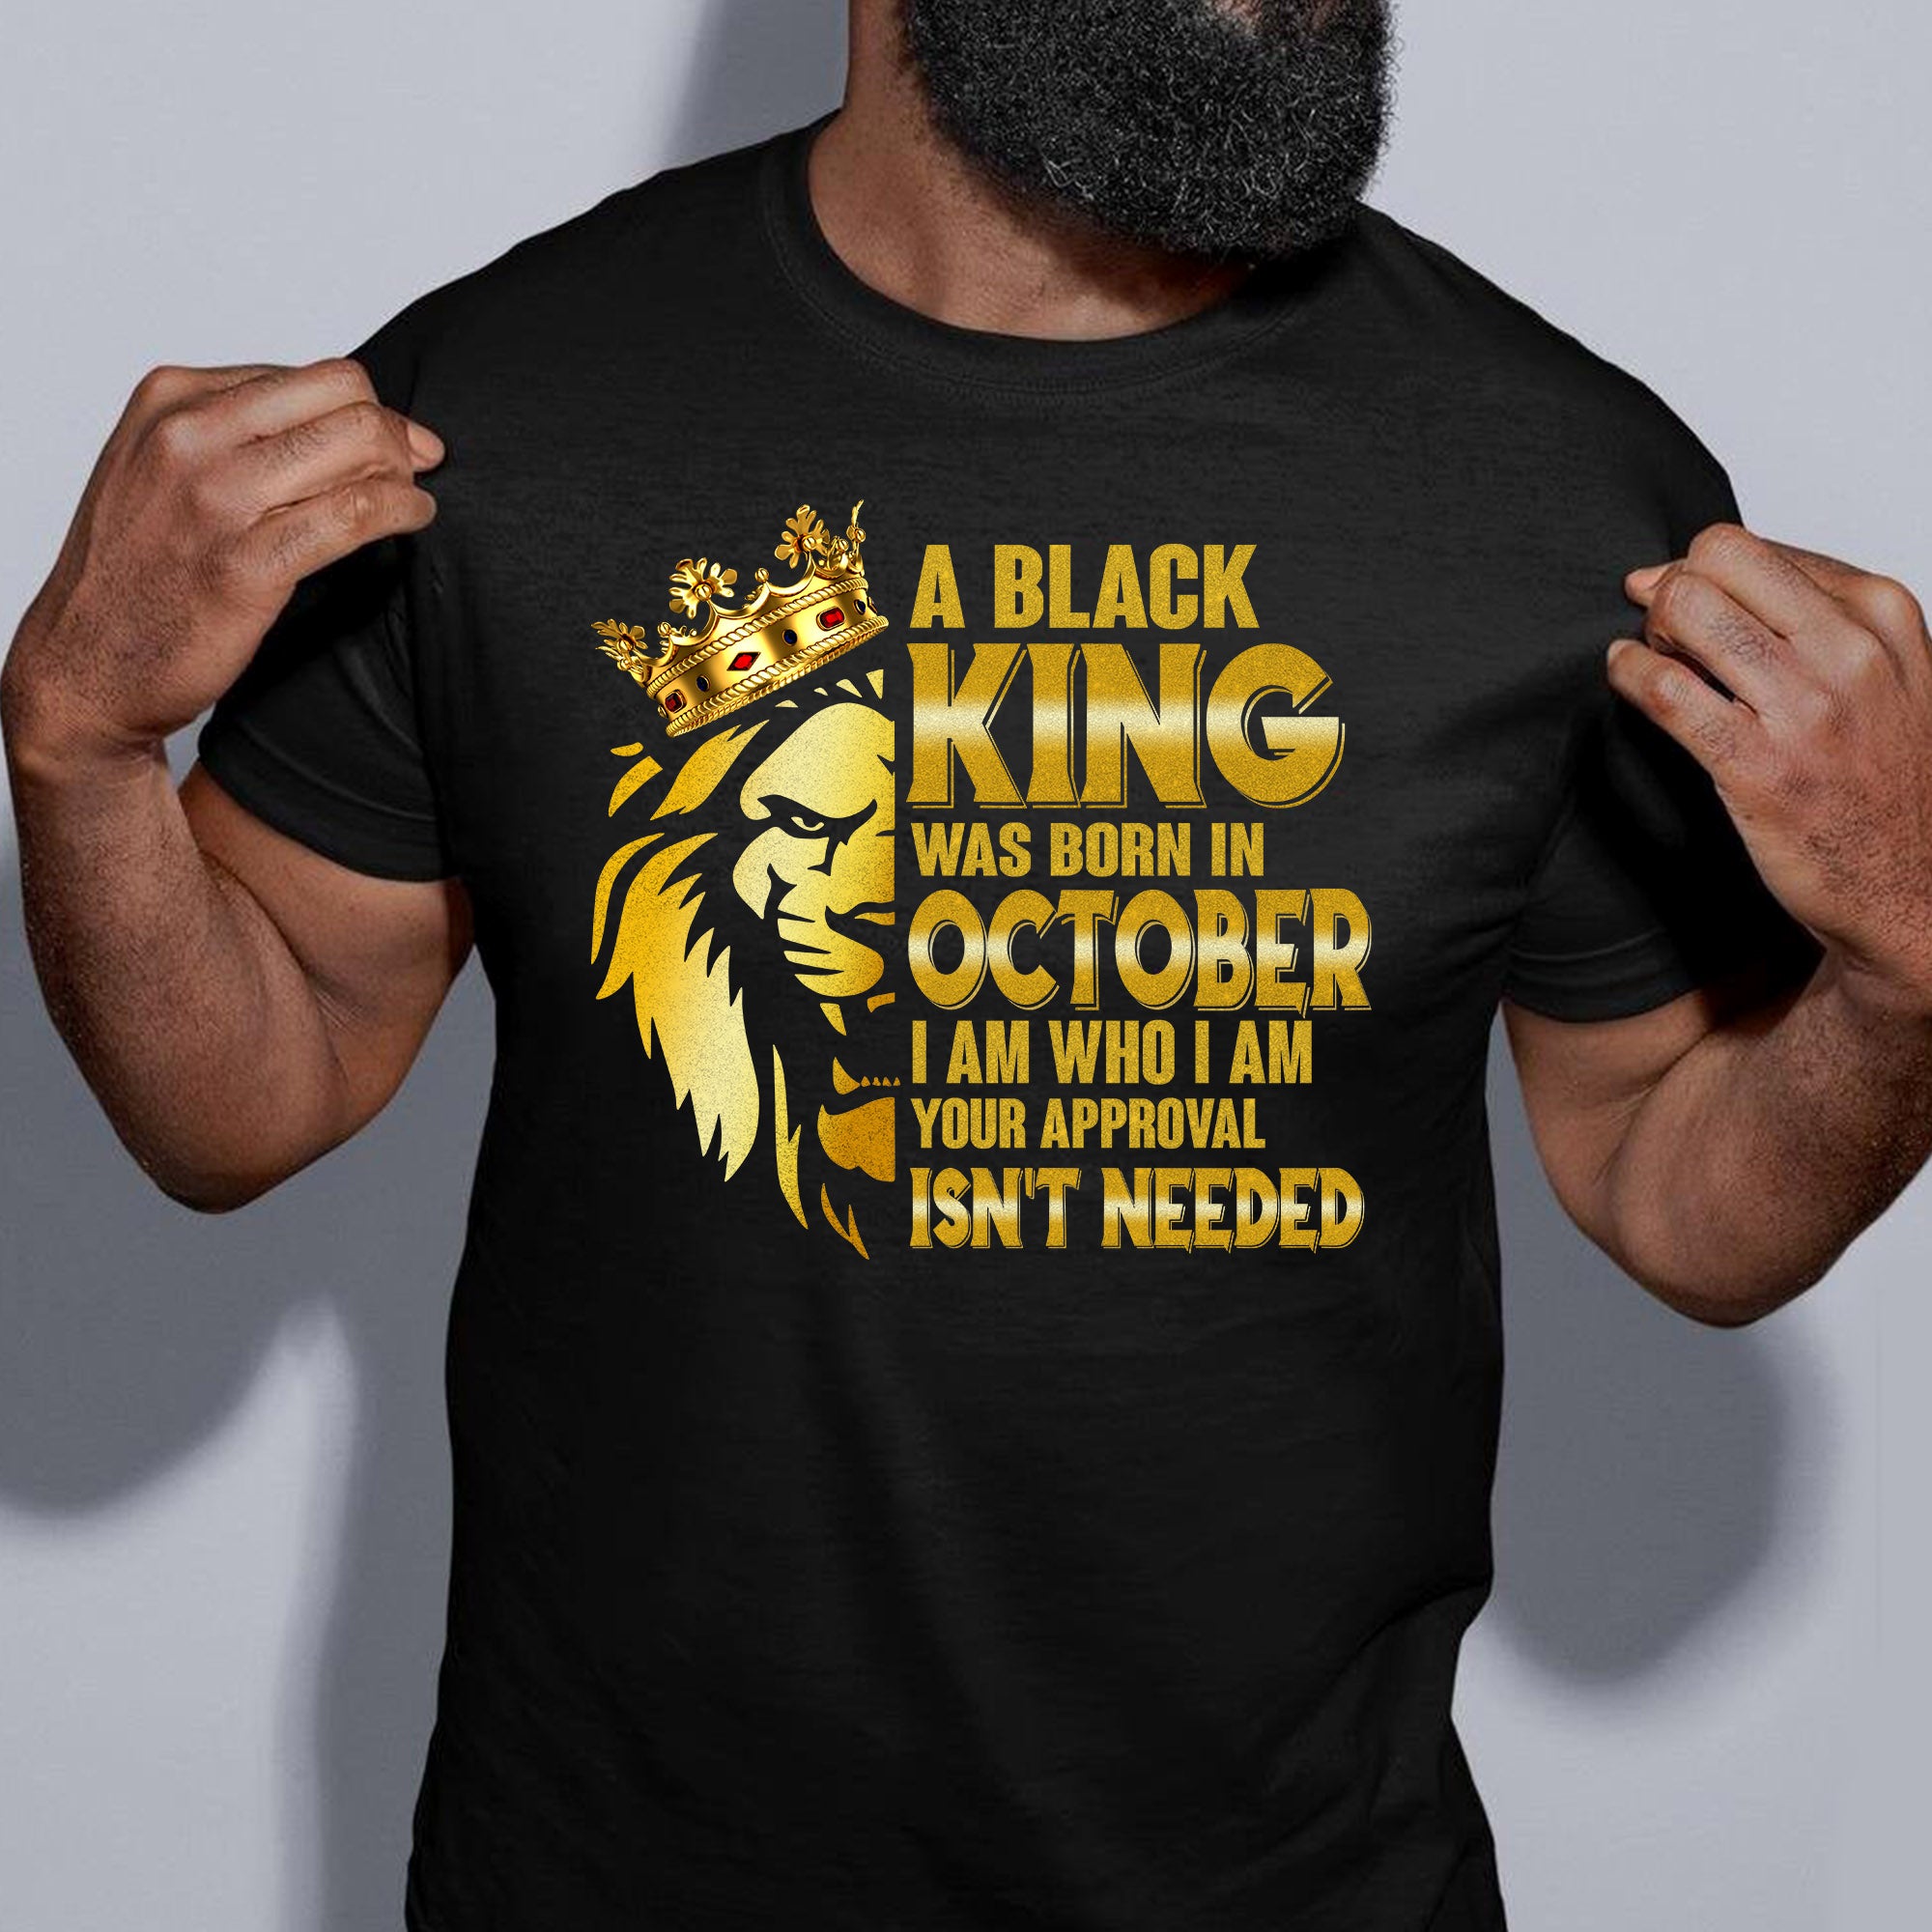 A Black King Was Born In October T-Shirt